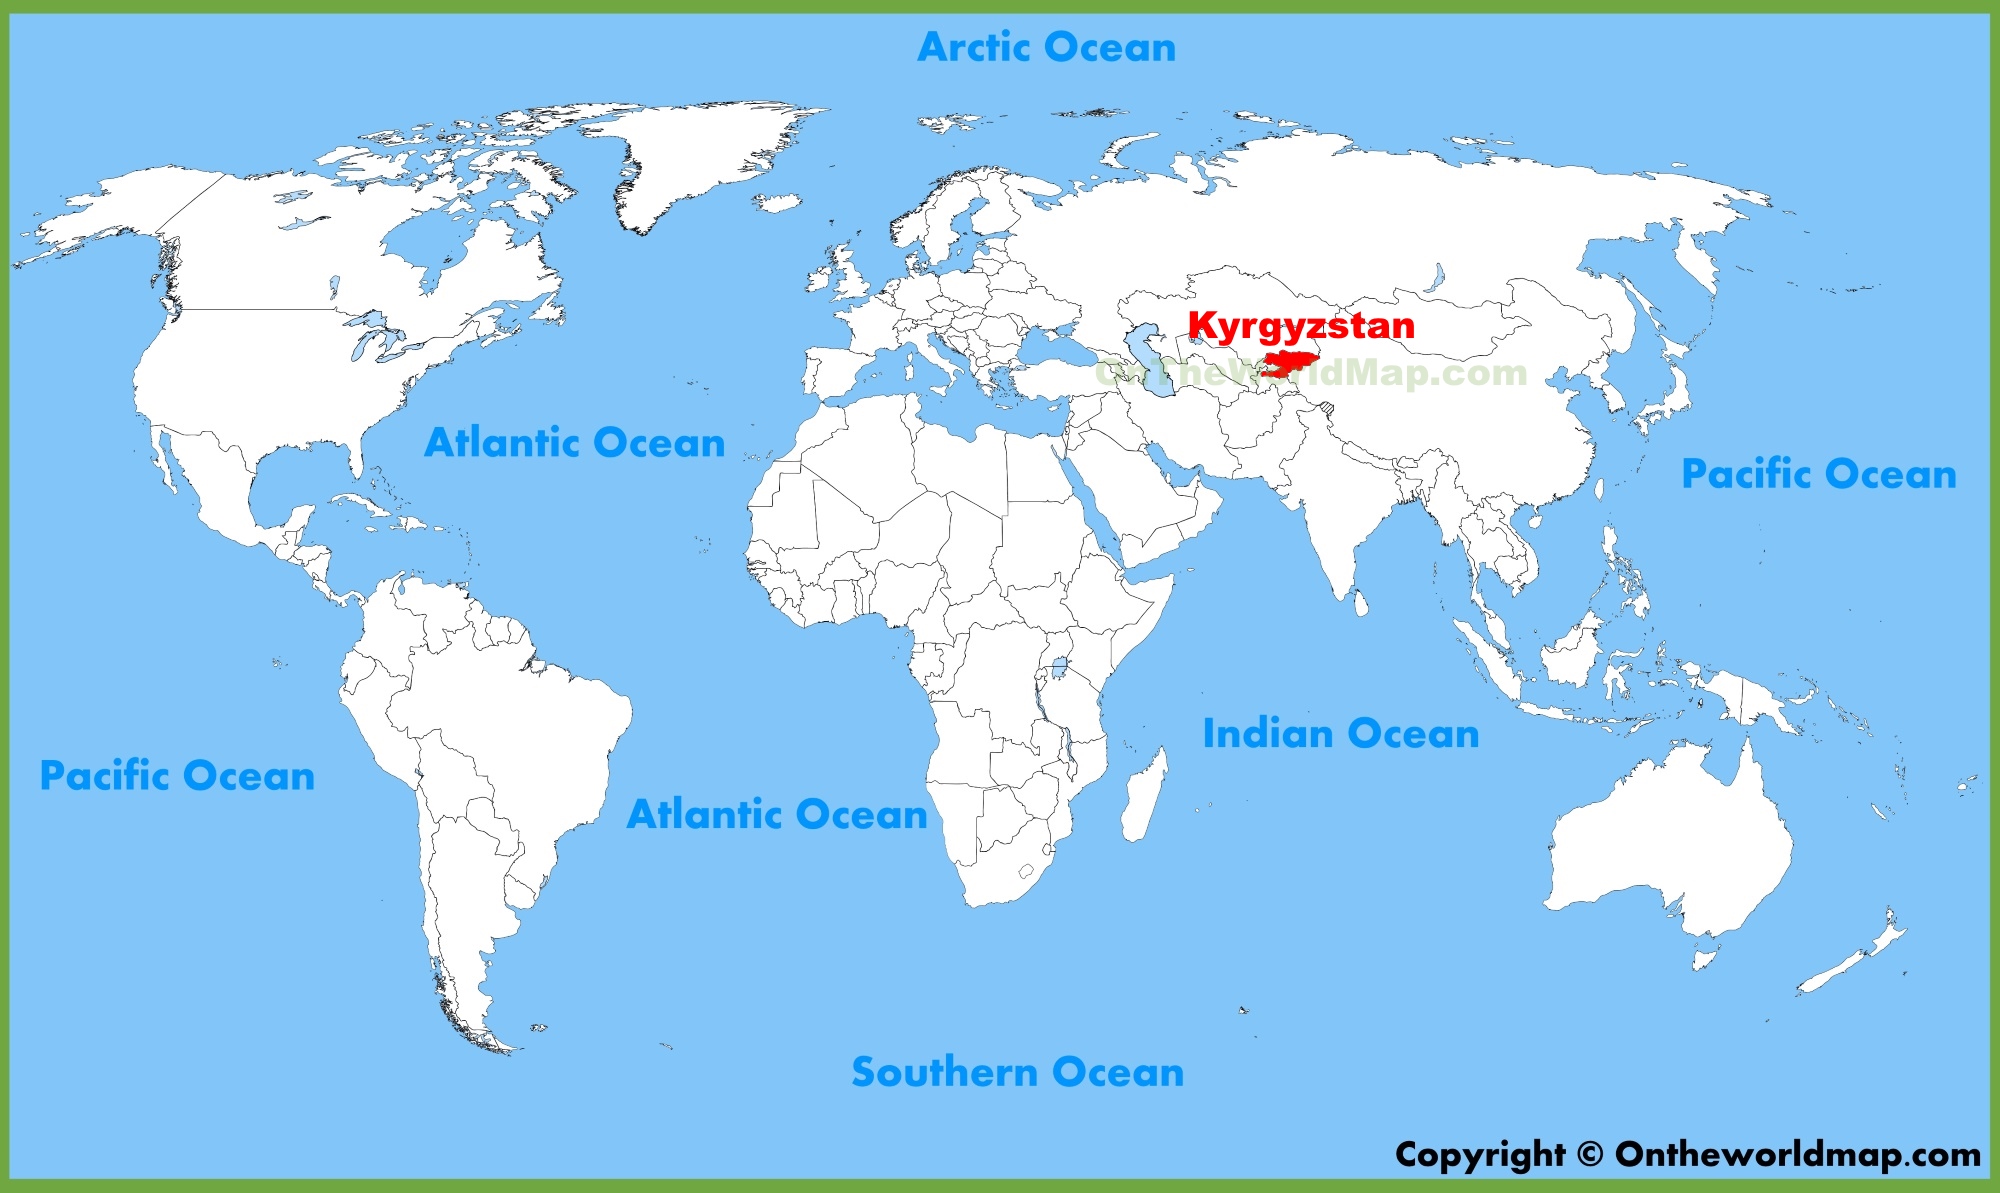 where is kyrgyzstan located on the world map Kyrgyzstan Location On The World Map where is kyrgyzstan located on the world map